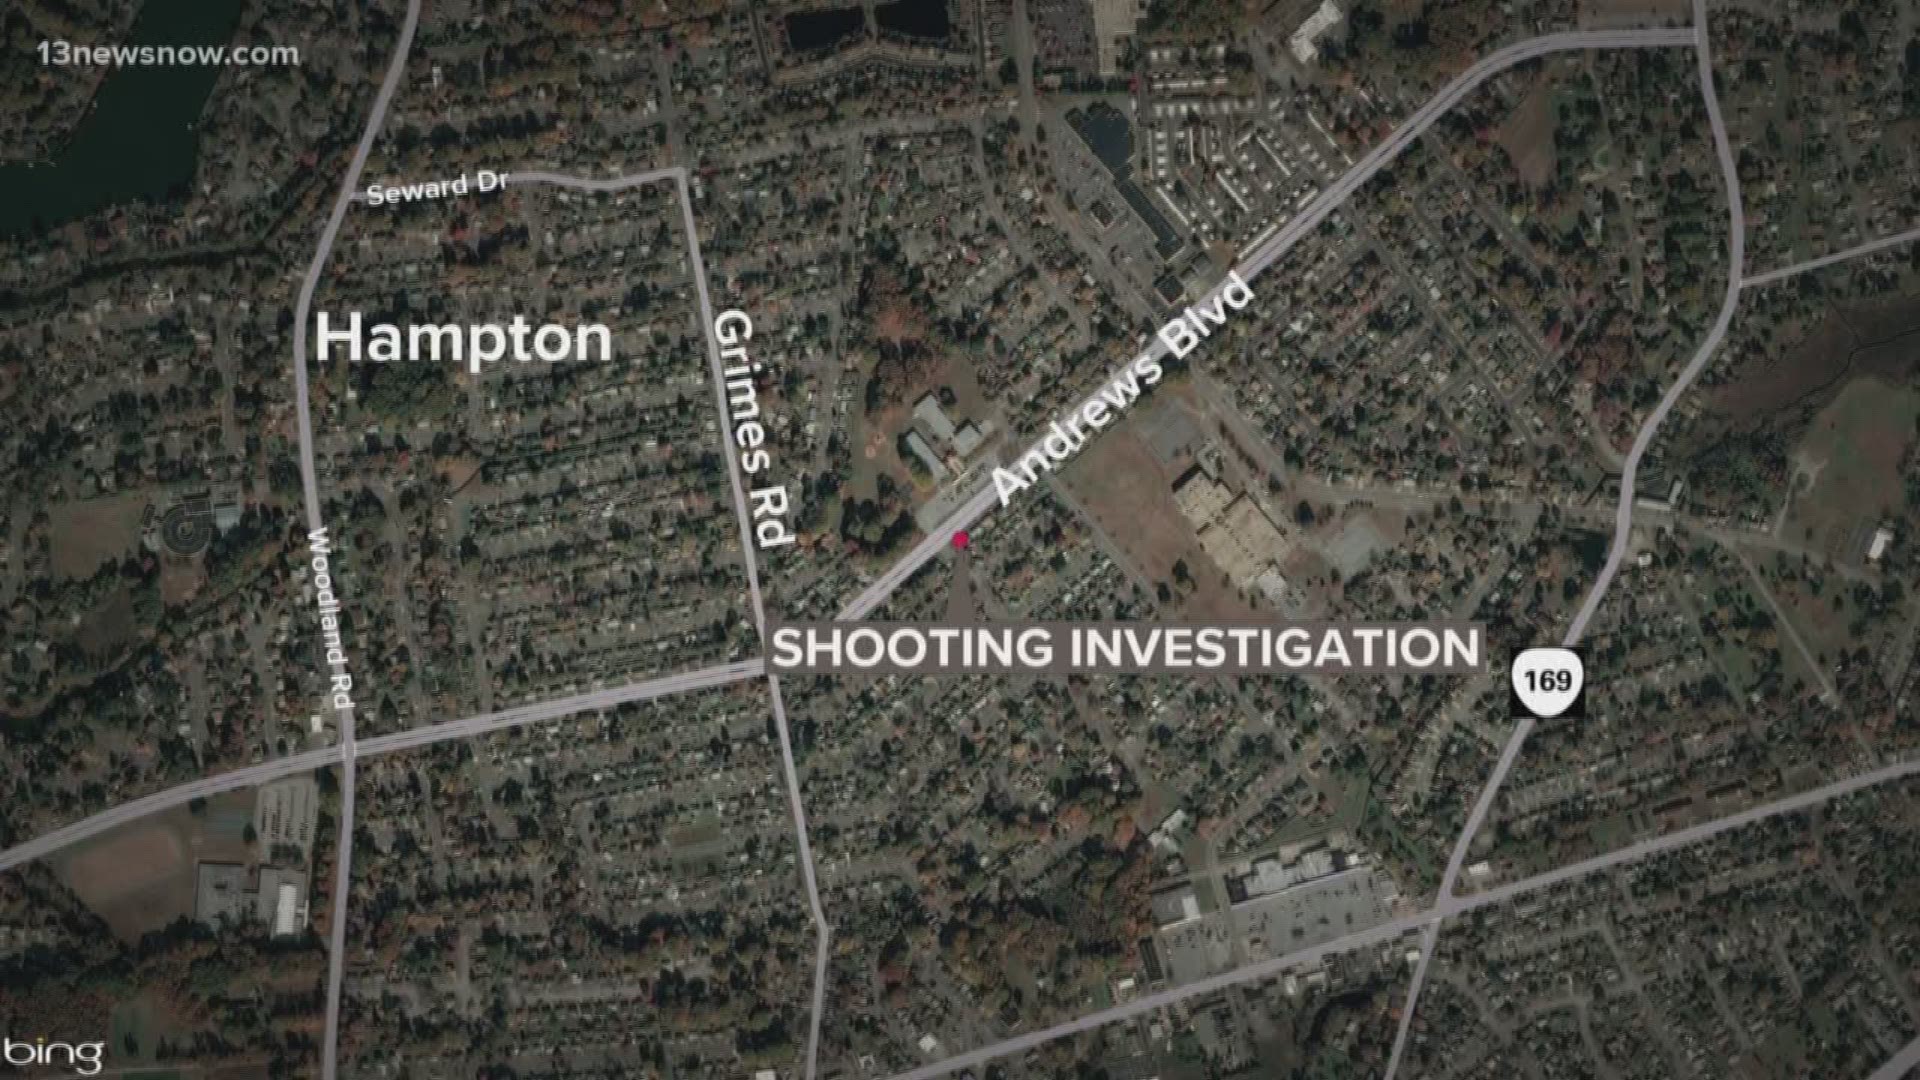 Police were called to a shooting scene on Andrews Boulevard in Hampton. The victim wasn't at the scene, but walked into a hospital later.